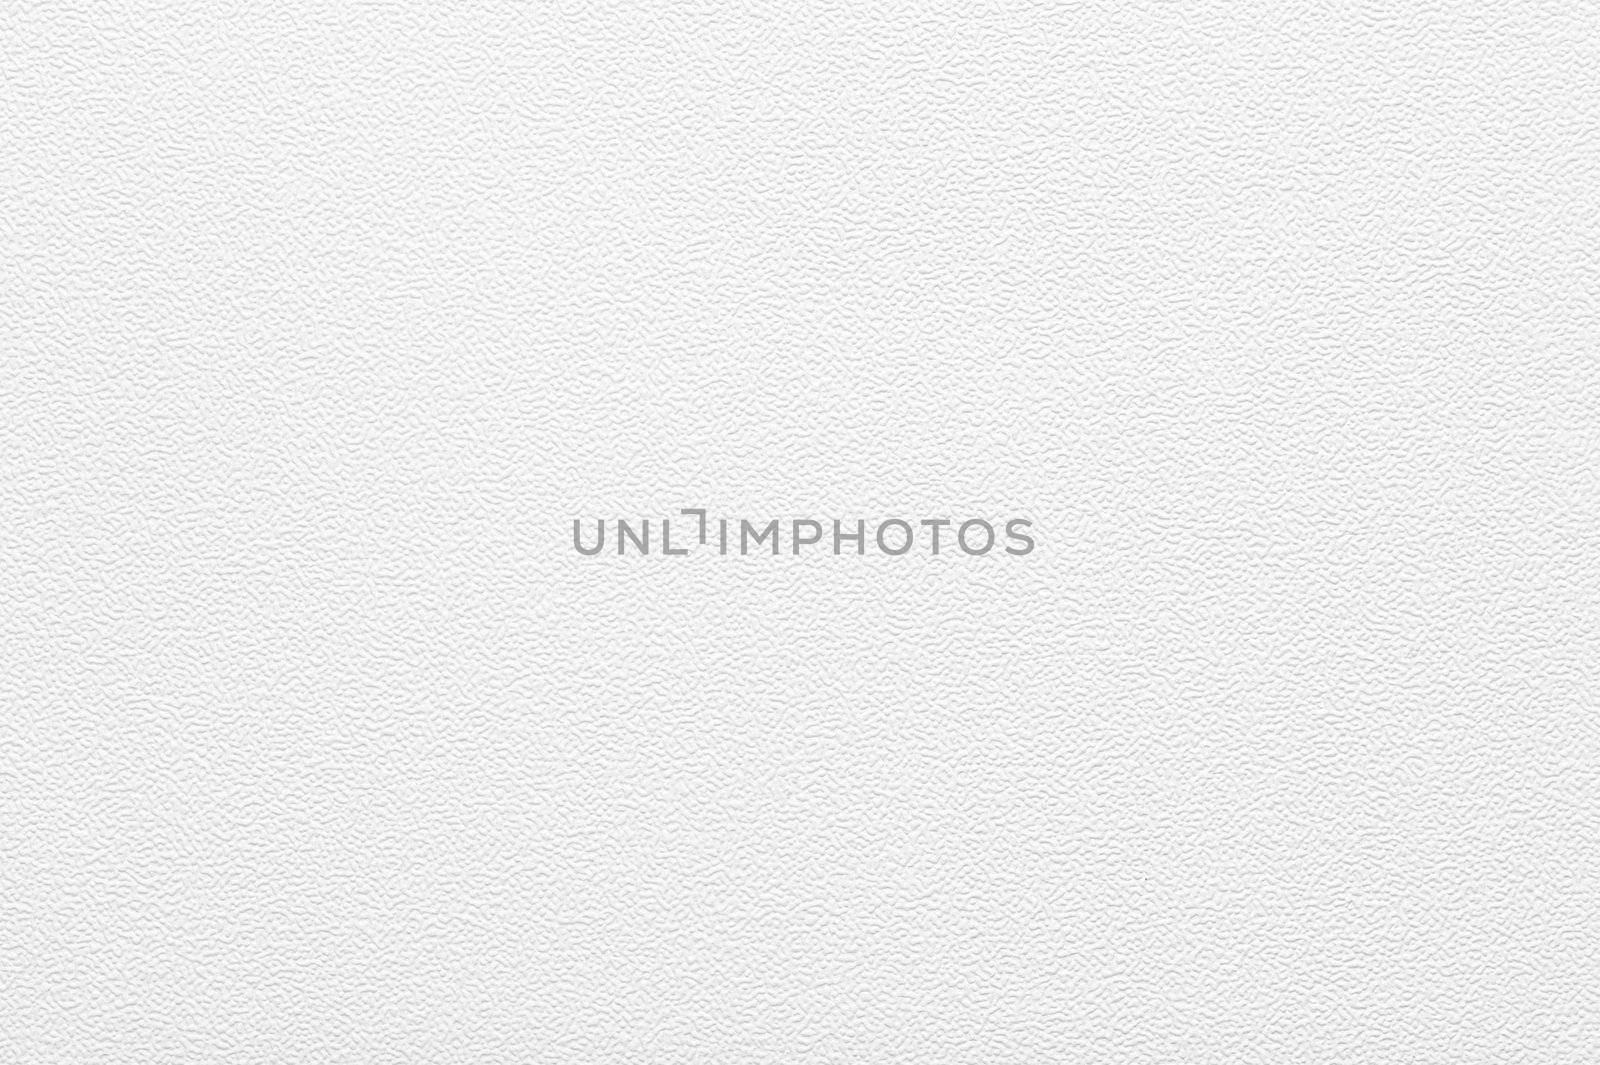 White paper texture, abstract background